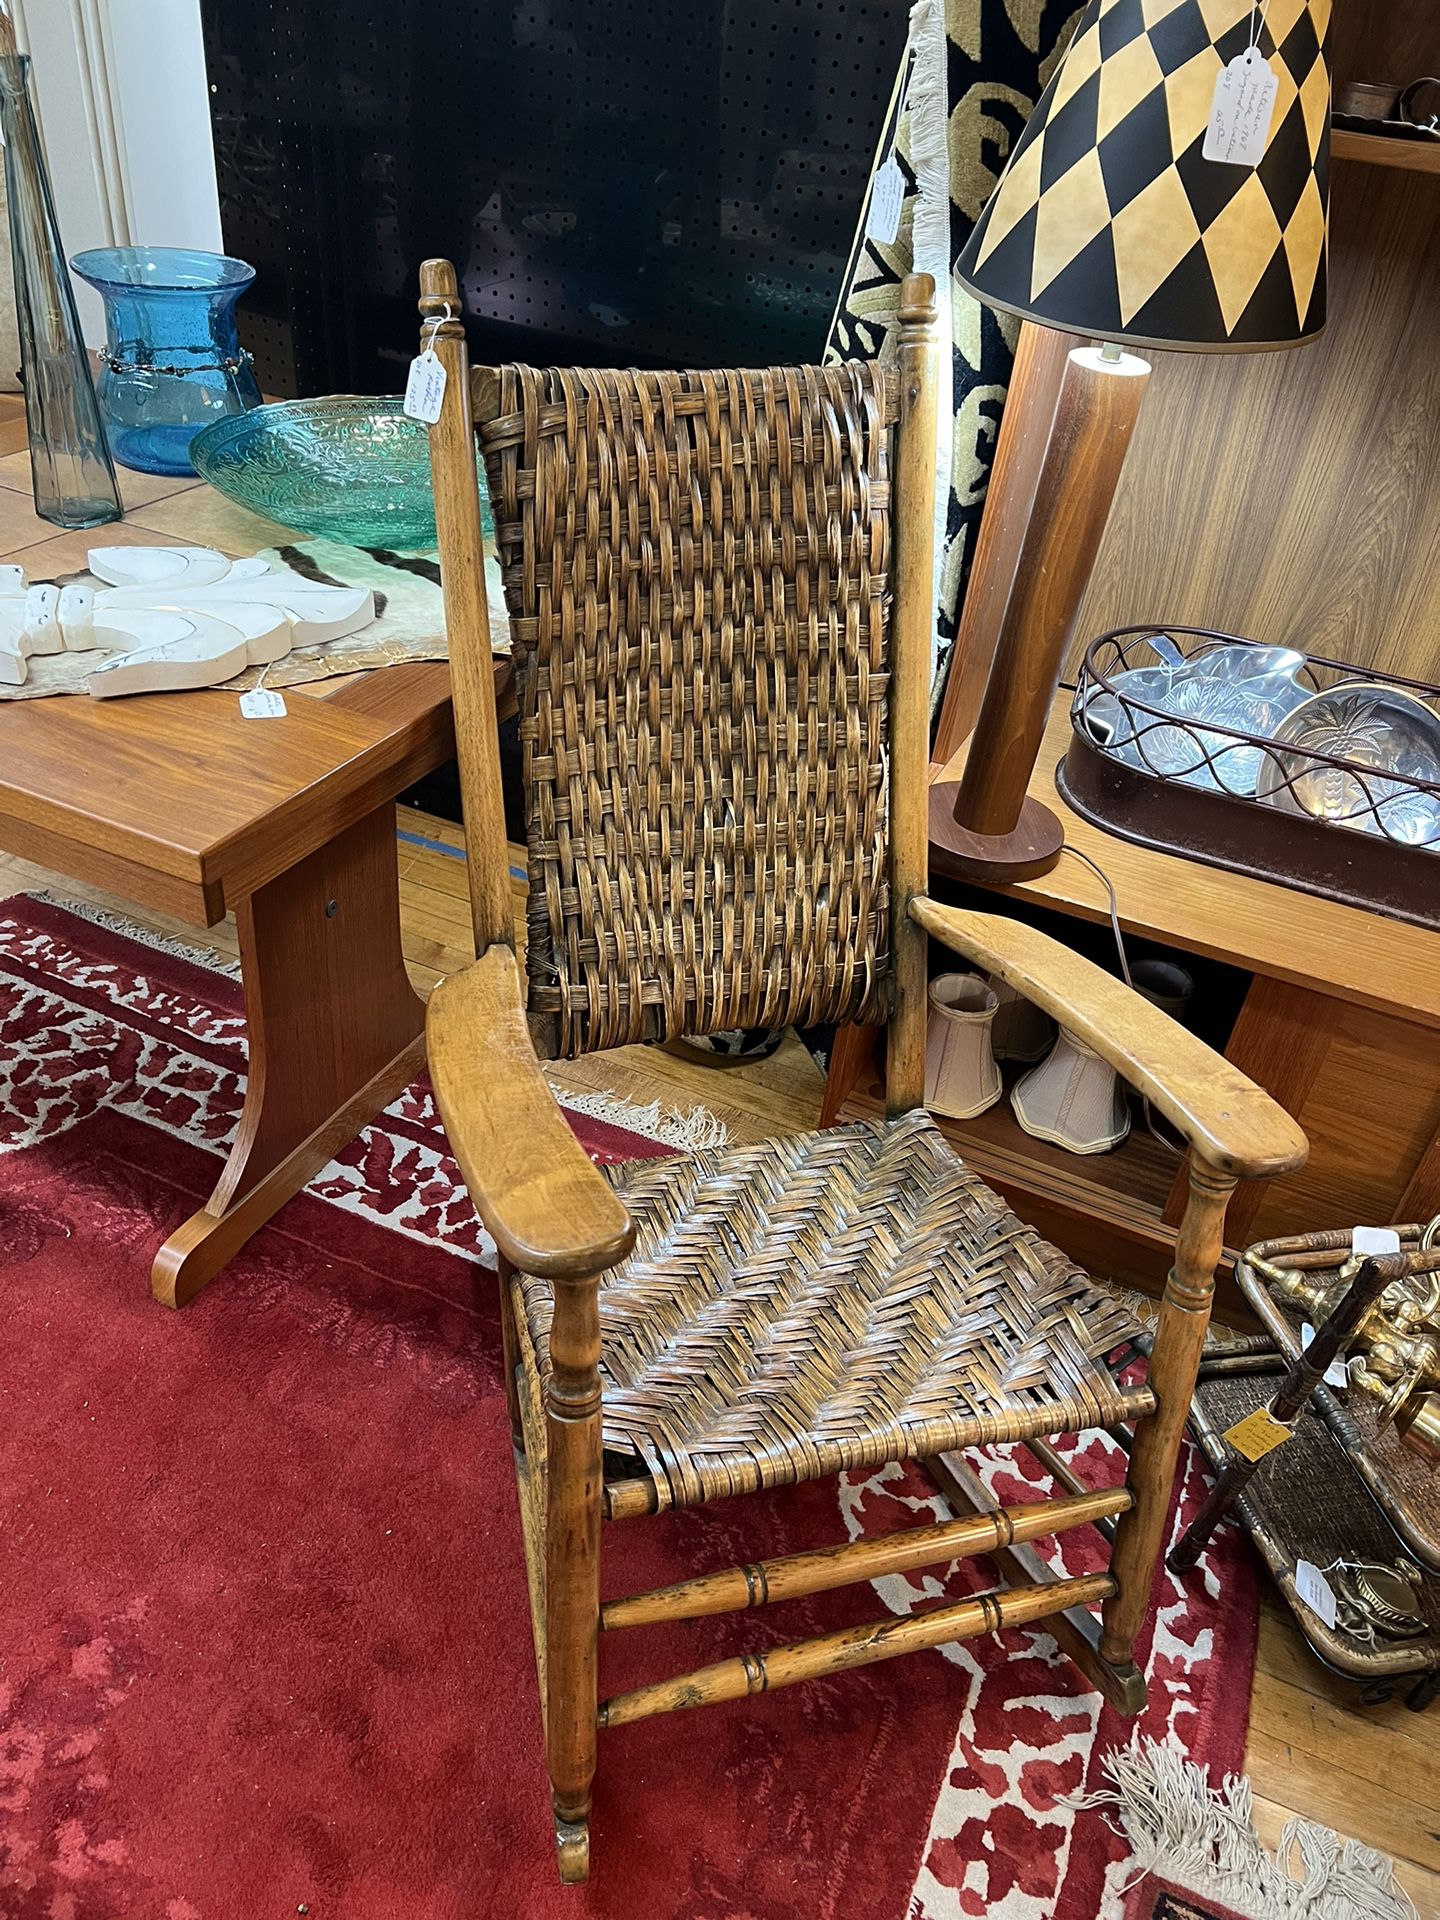 Antique woven Seat Rocking Chair